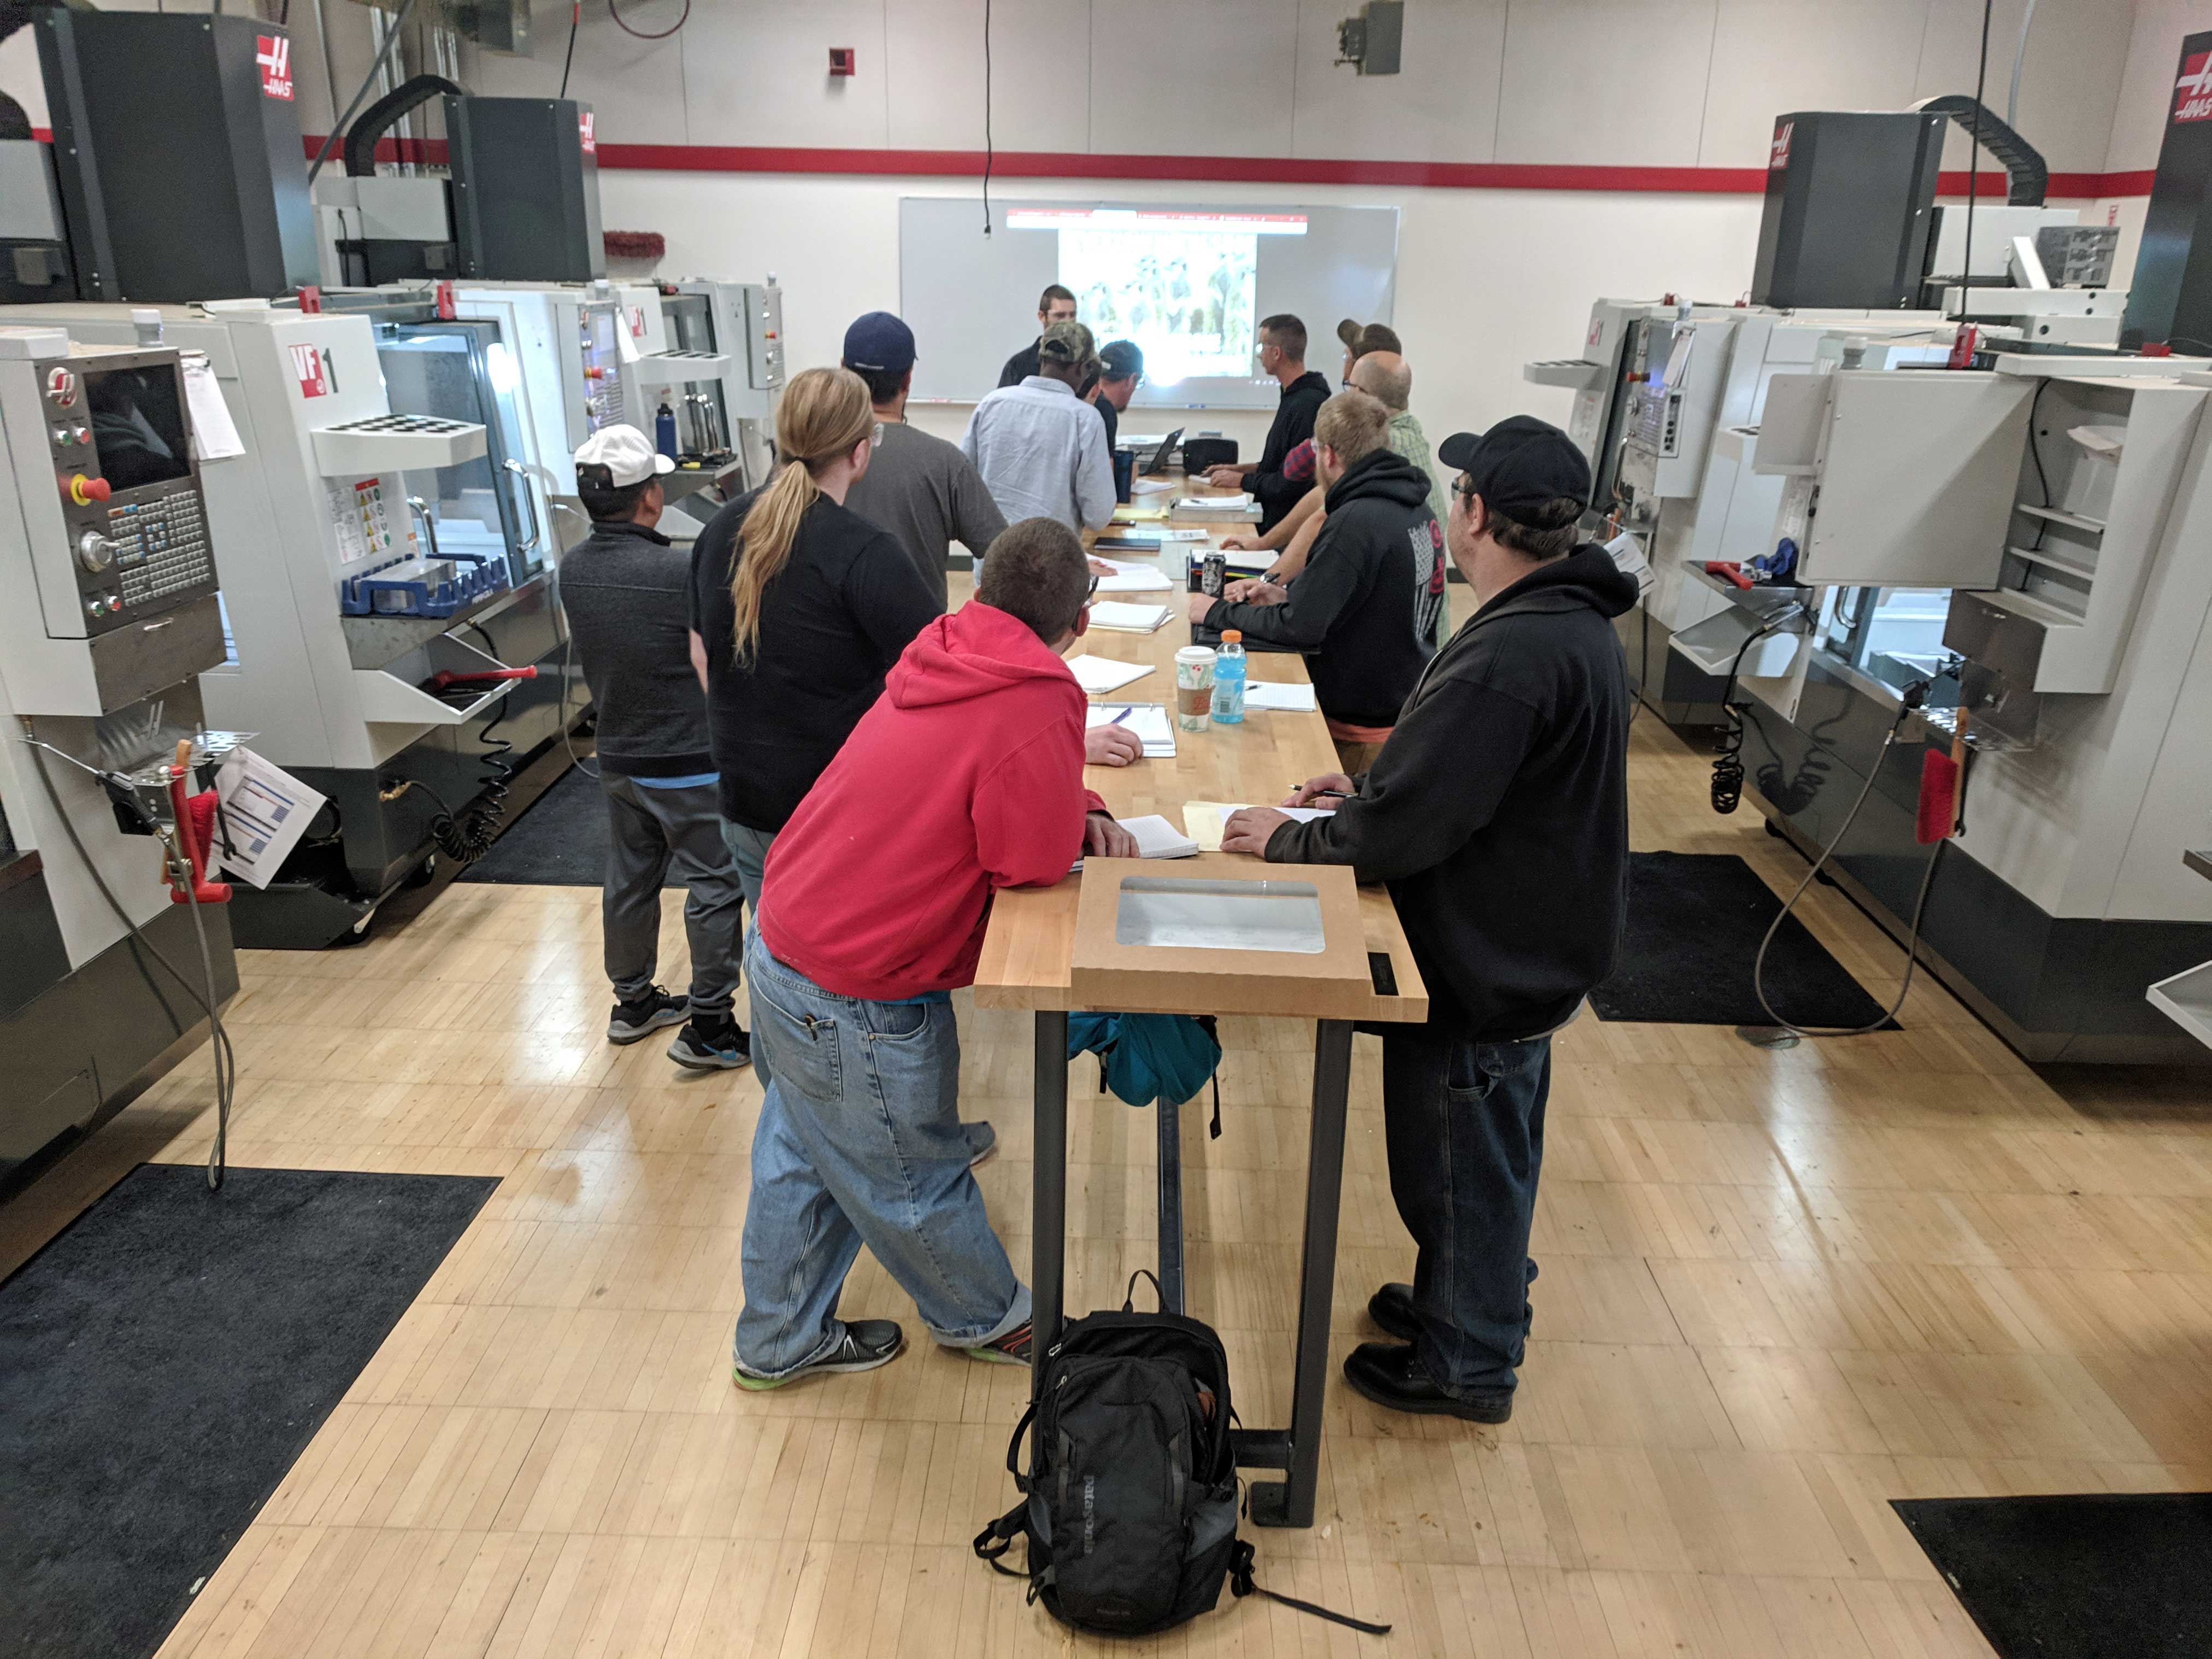 The Sacramento Valley Manufacturing Initiative held CNC training at the Sierra College Haas Center for Advanced Manufacturing by Design to prepare trainees for machinist apprenticeships.